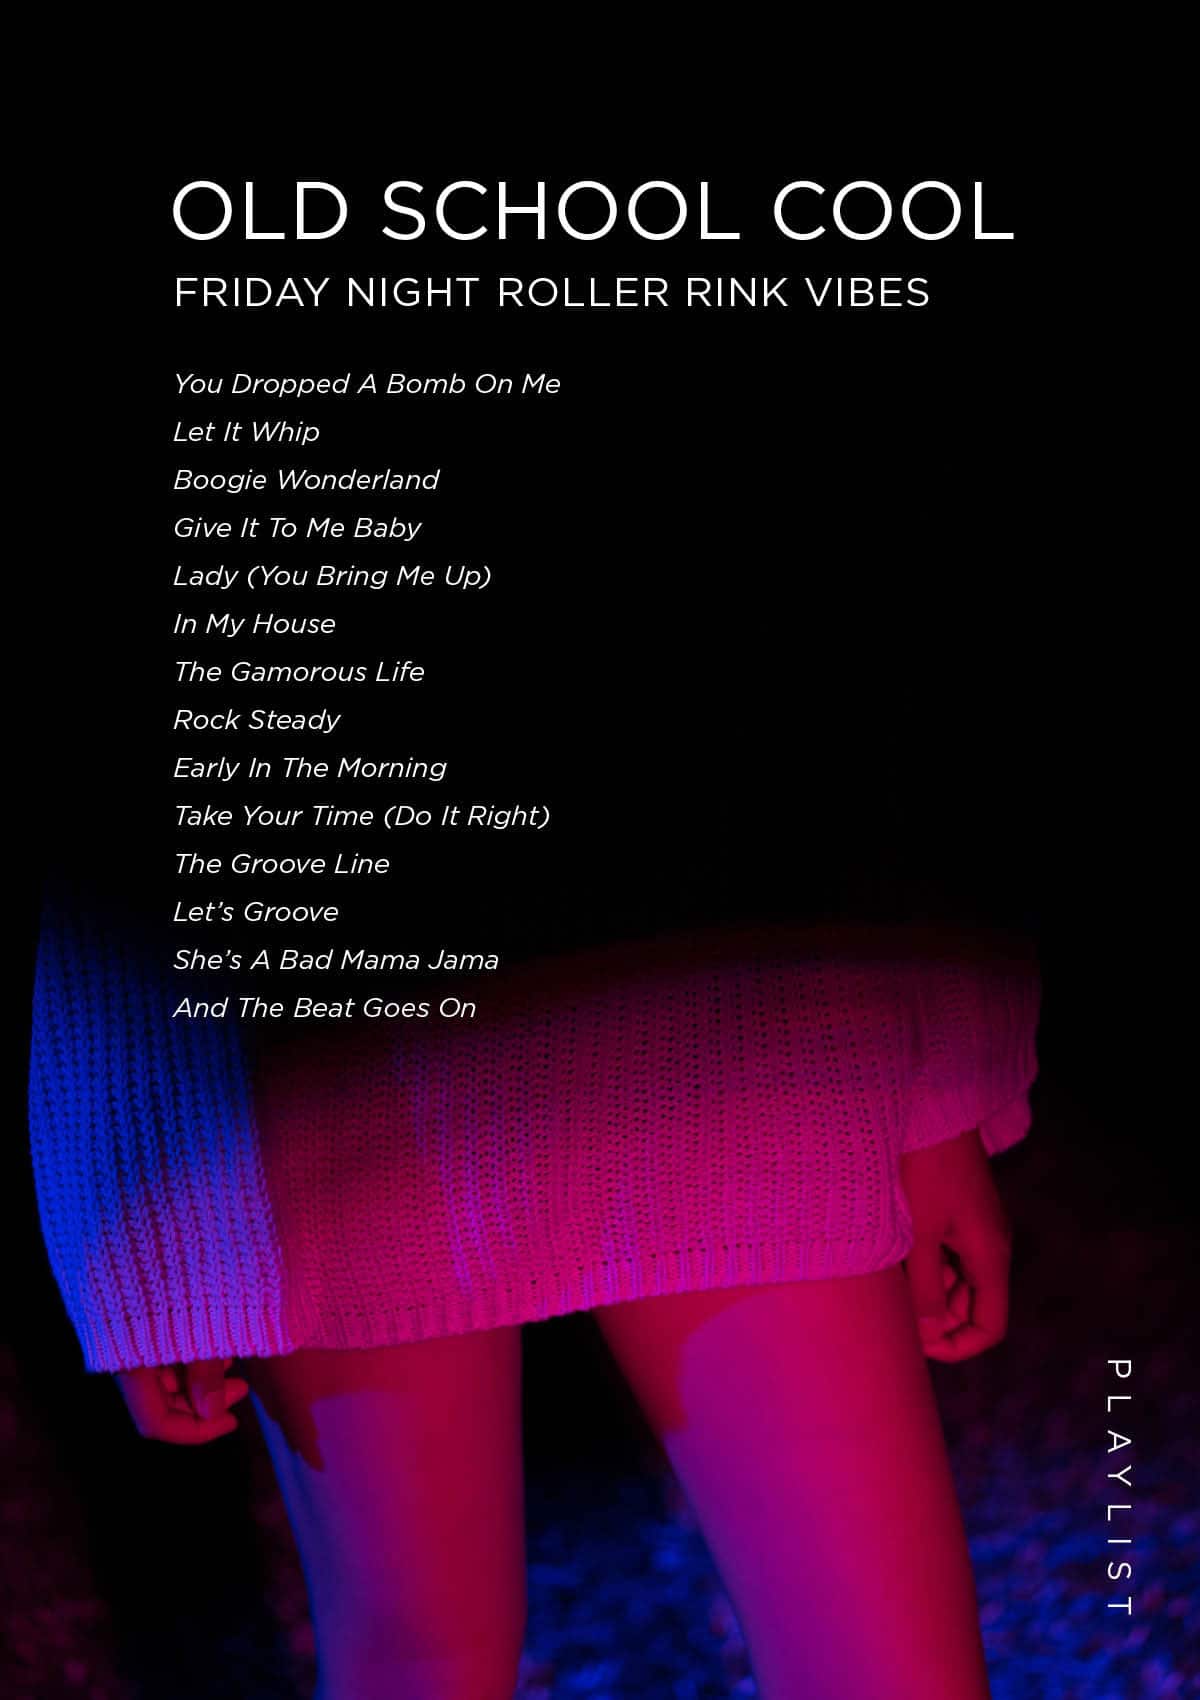 Disco Night At The Roller Rink Playlist